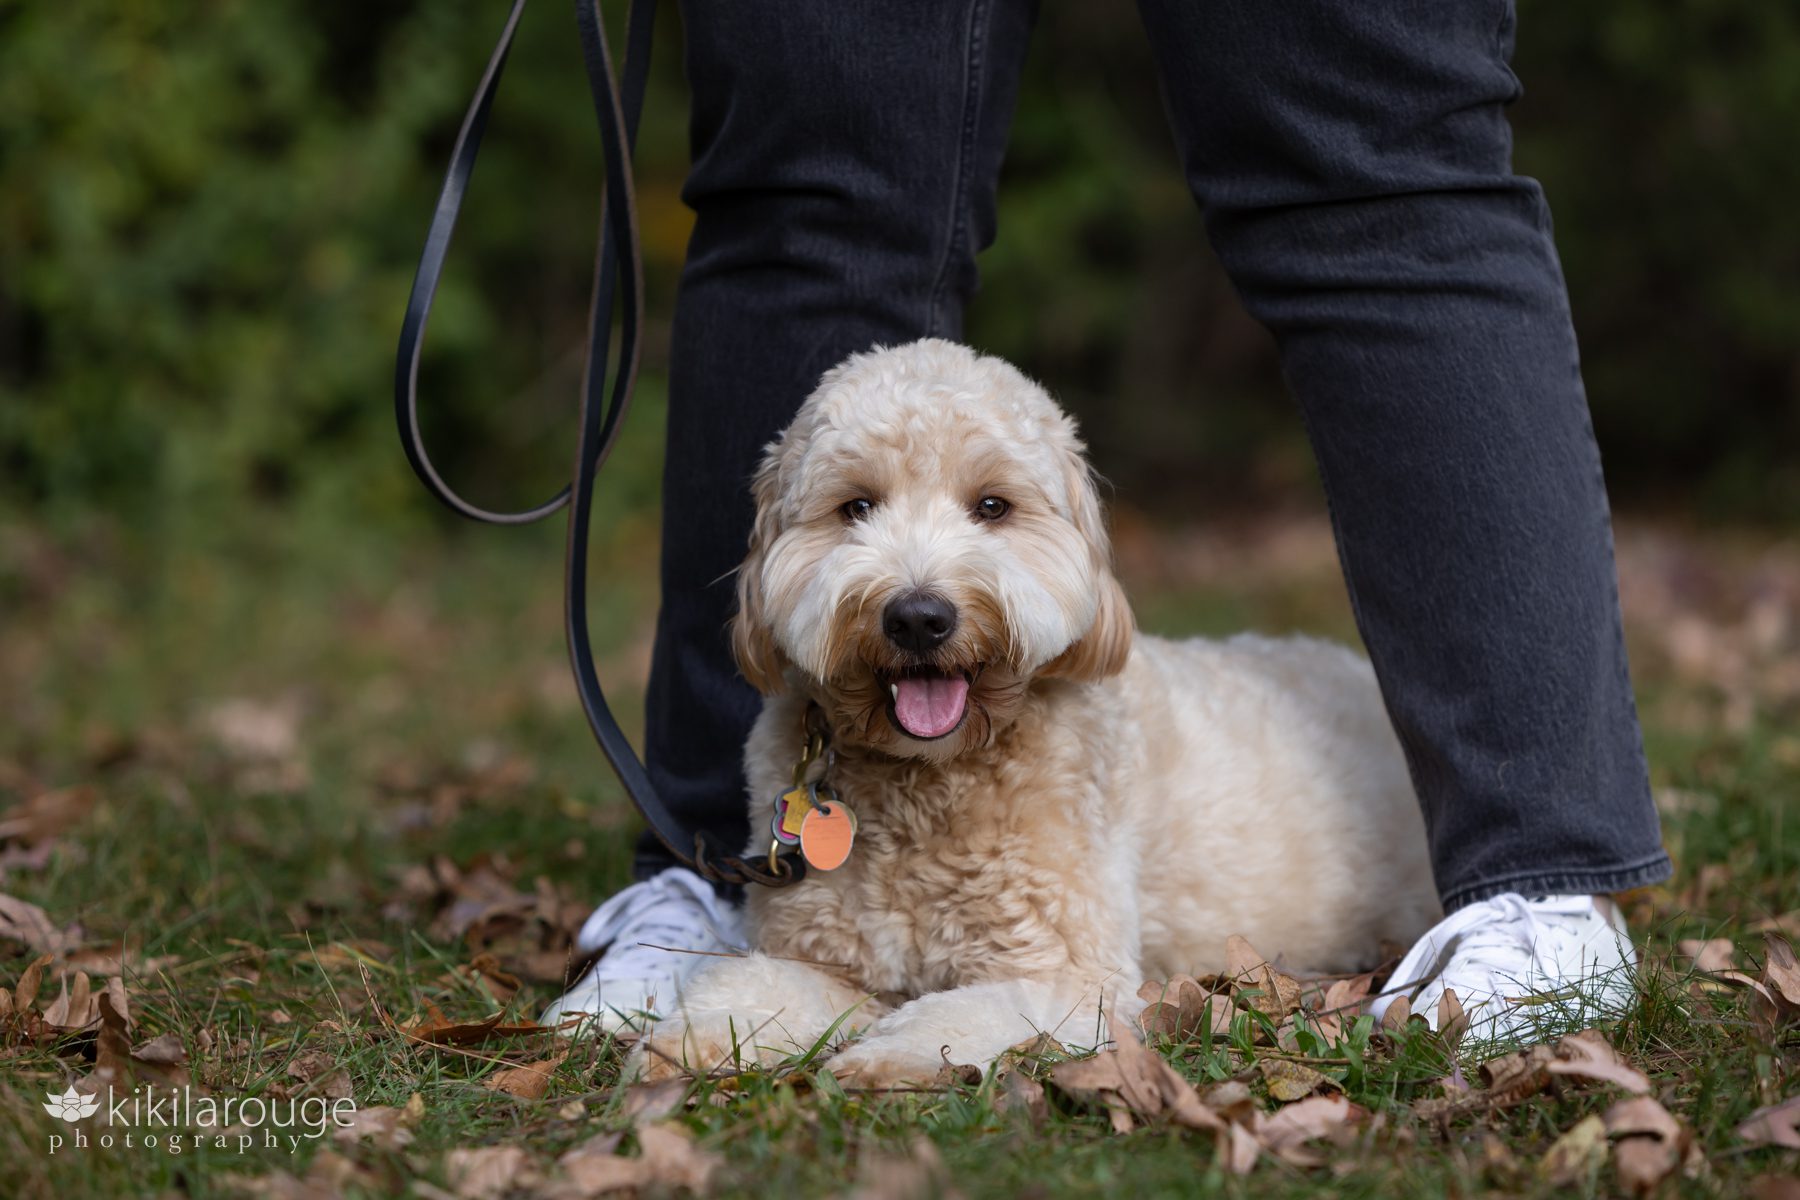 Cute labradoodle with tongue out in between Mom's legs who has on jeans and white sneakers